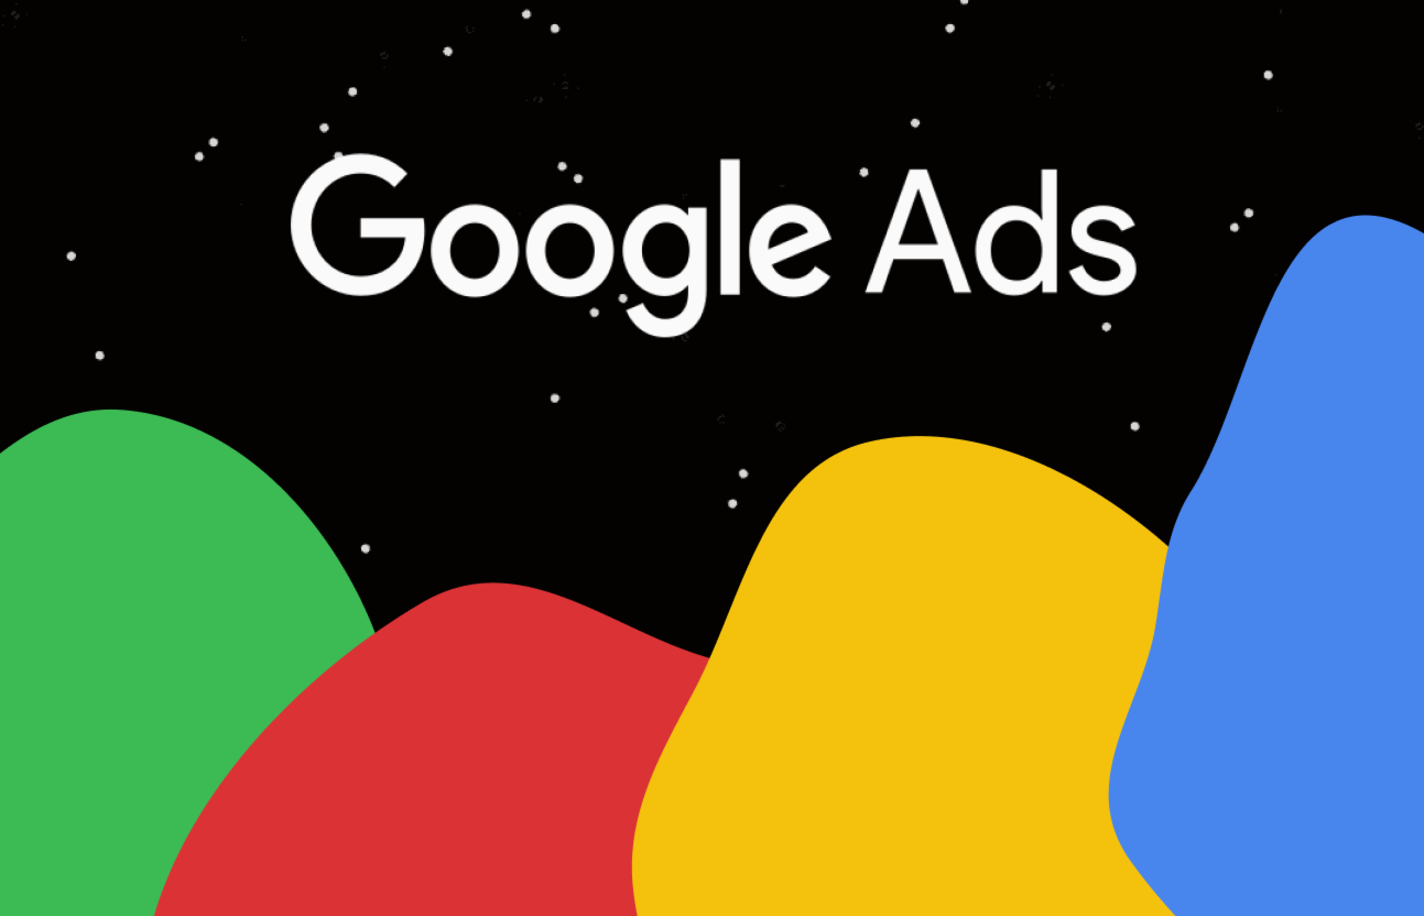 night sky graphic with the text Google Ads